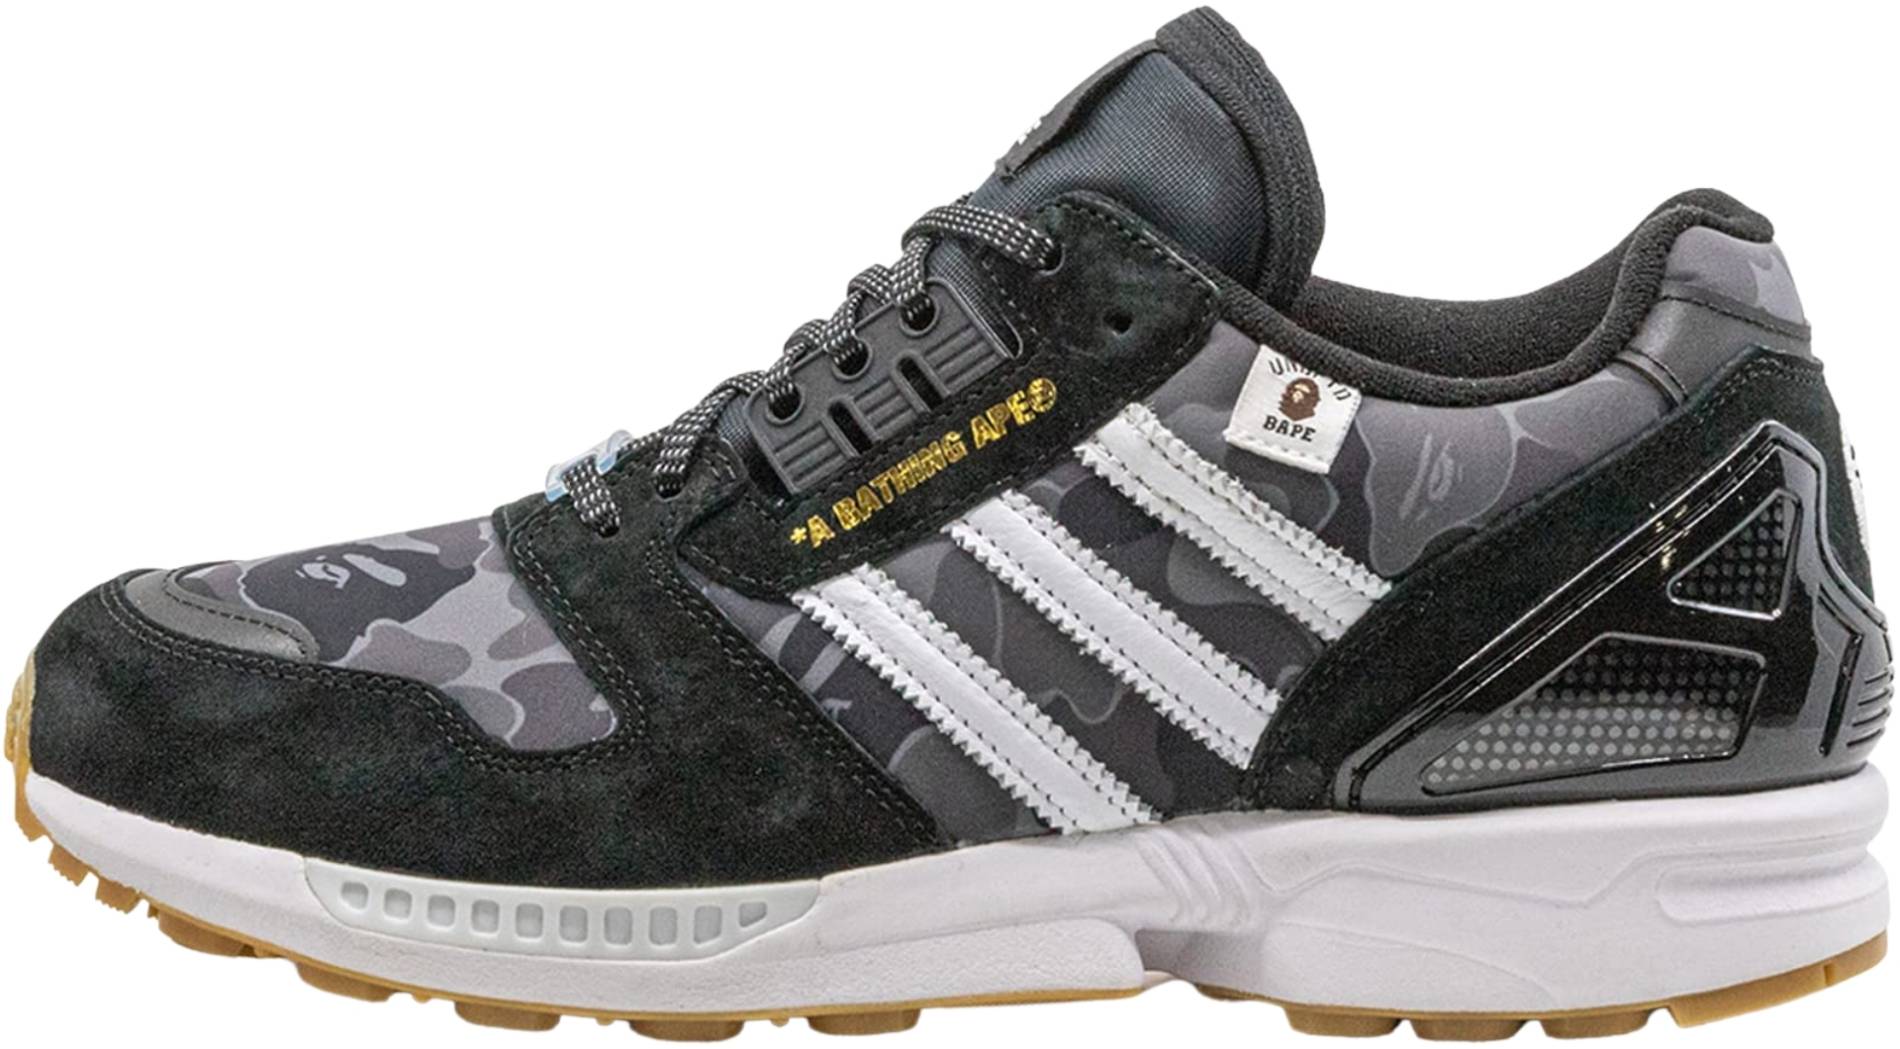 radiador monitor Sherlock Holmes Adidas ZX 8000 sneakers in 20+ colors (only $55) | RunRepeat